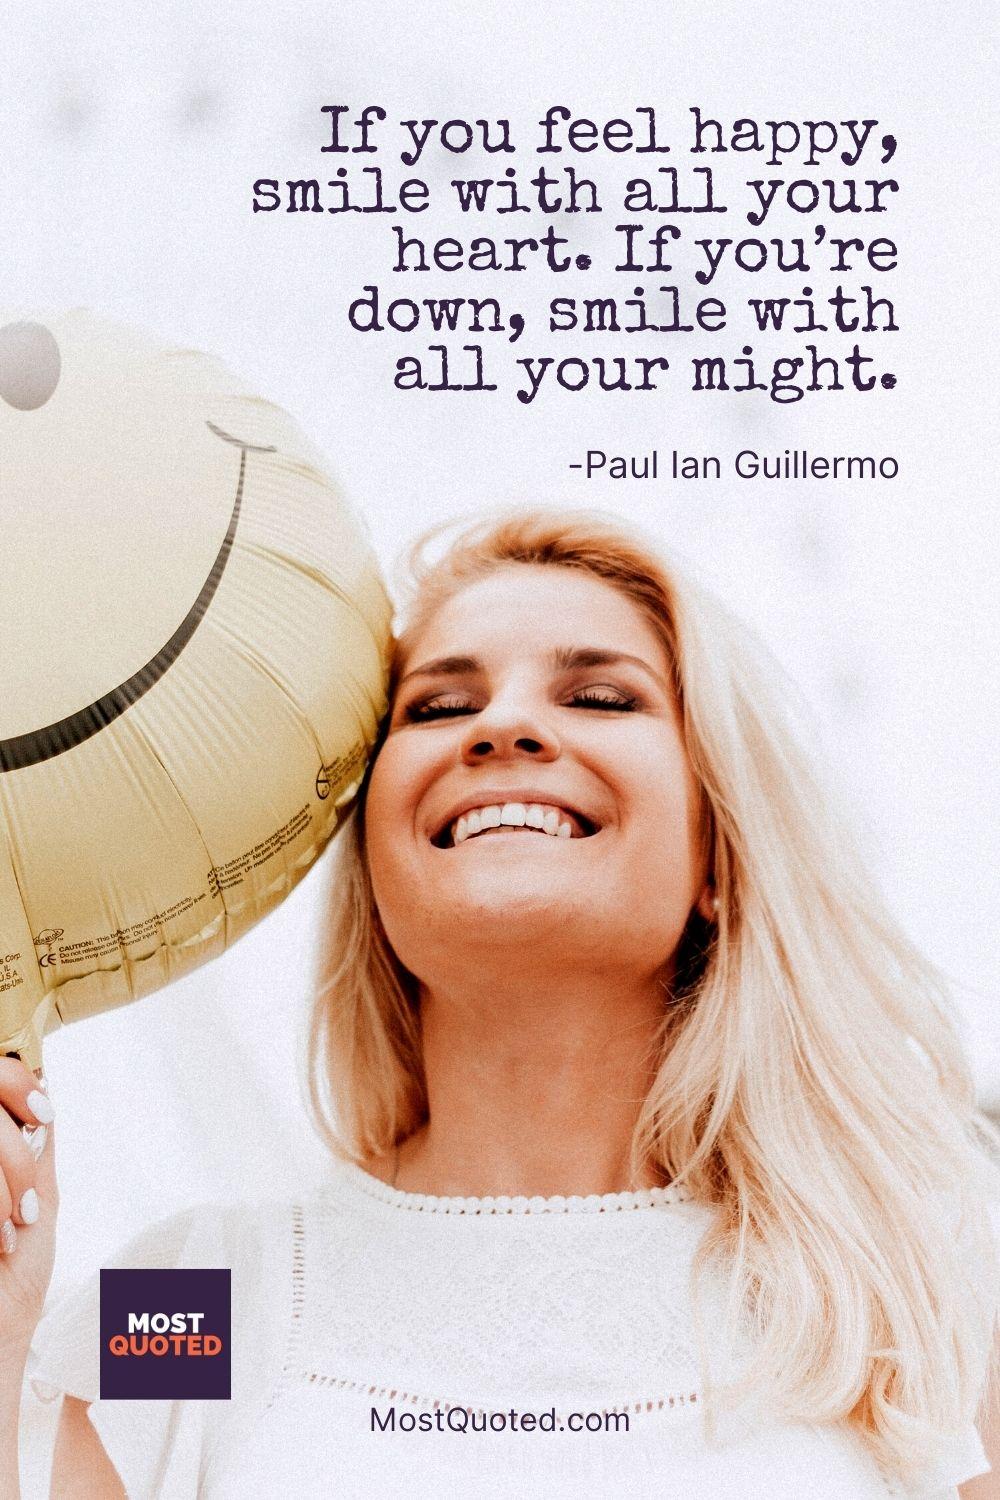 If you feel happy, smile with all your heart. If you’re down, smile with all your might. - Paul Ian Guillermo